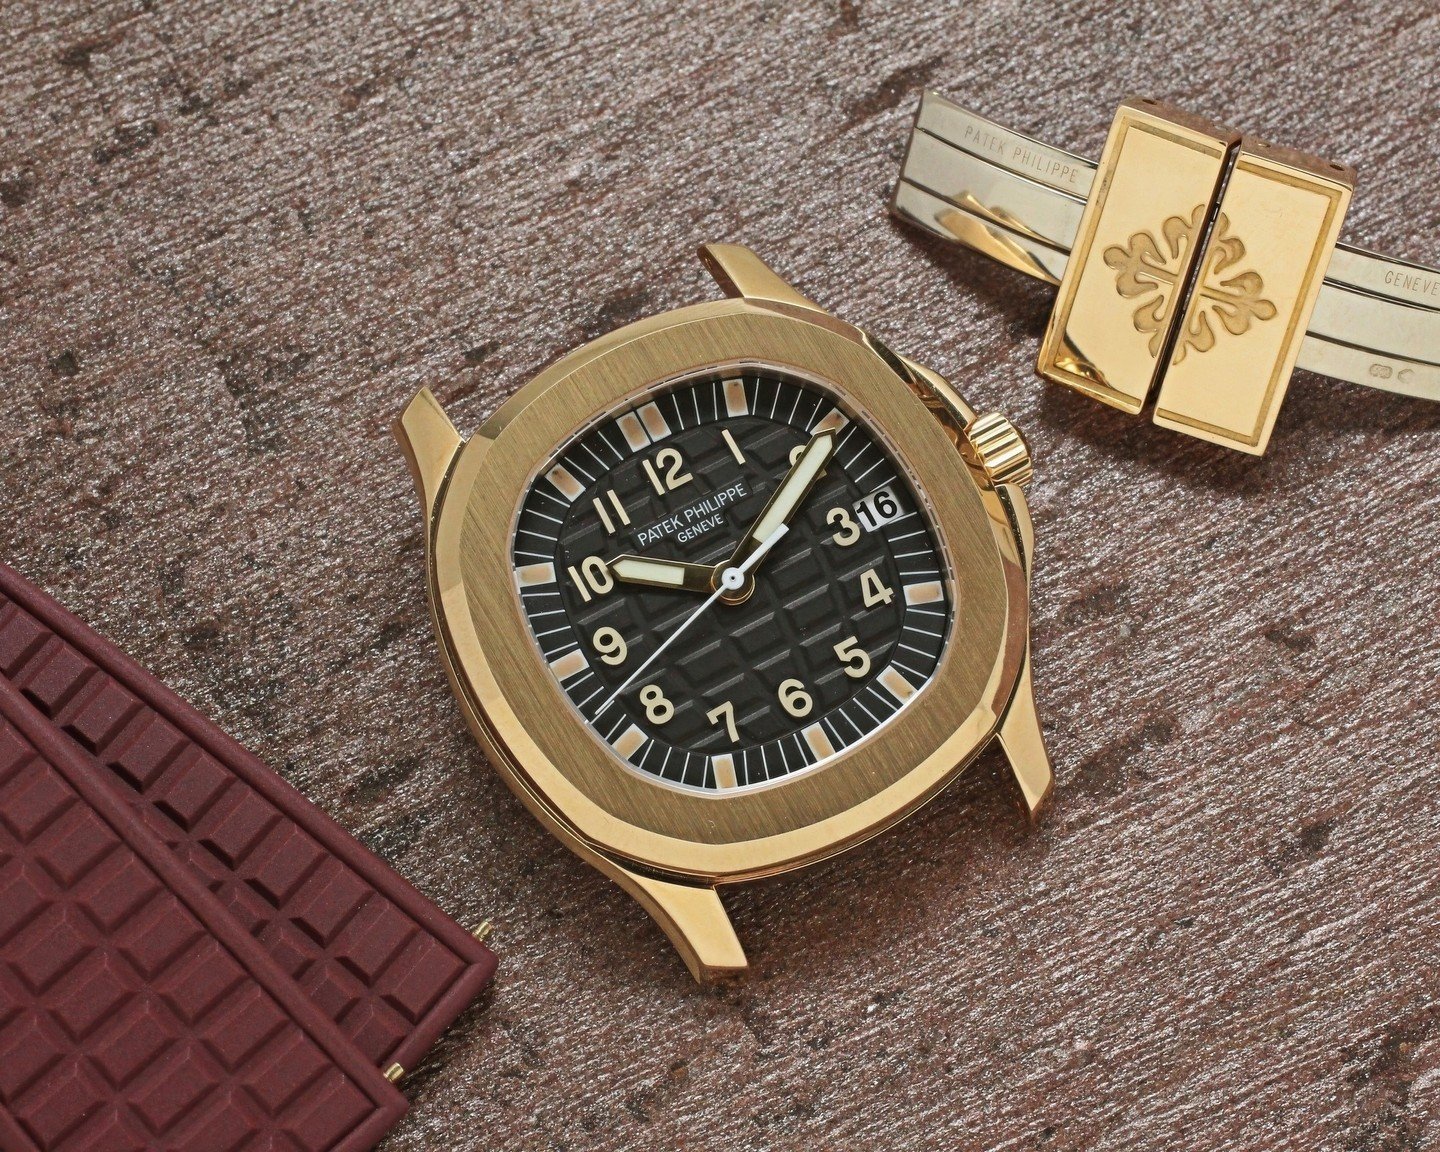 A blend of casual luxury from the neo-vintage era - the Patek Philippe Aquanaut in yellow gold.